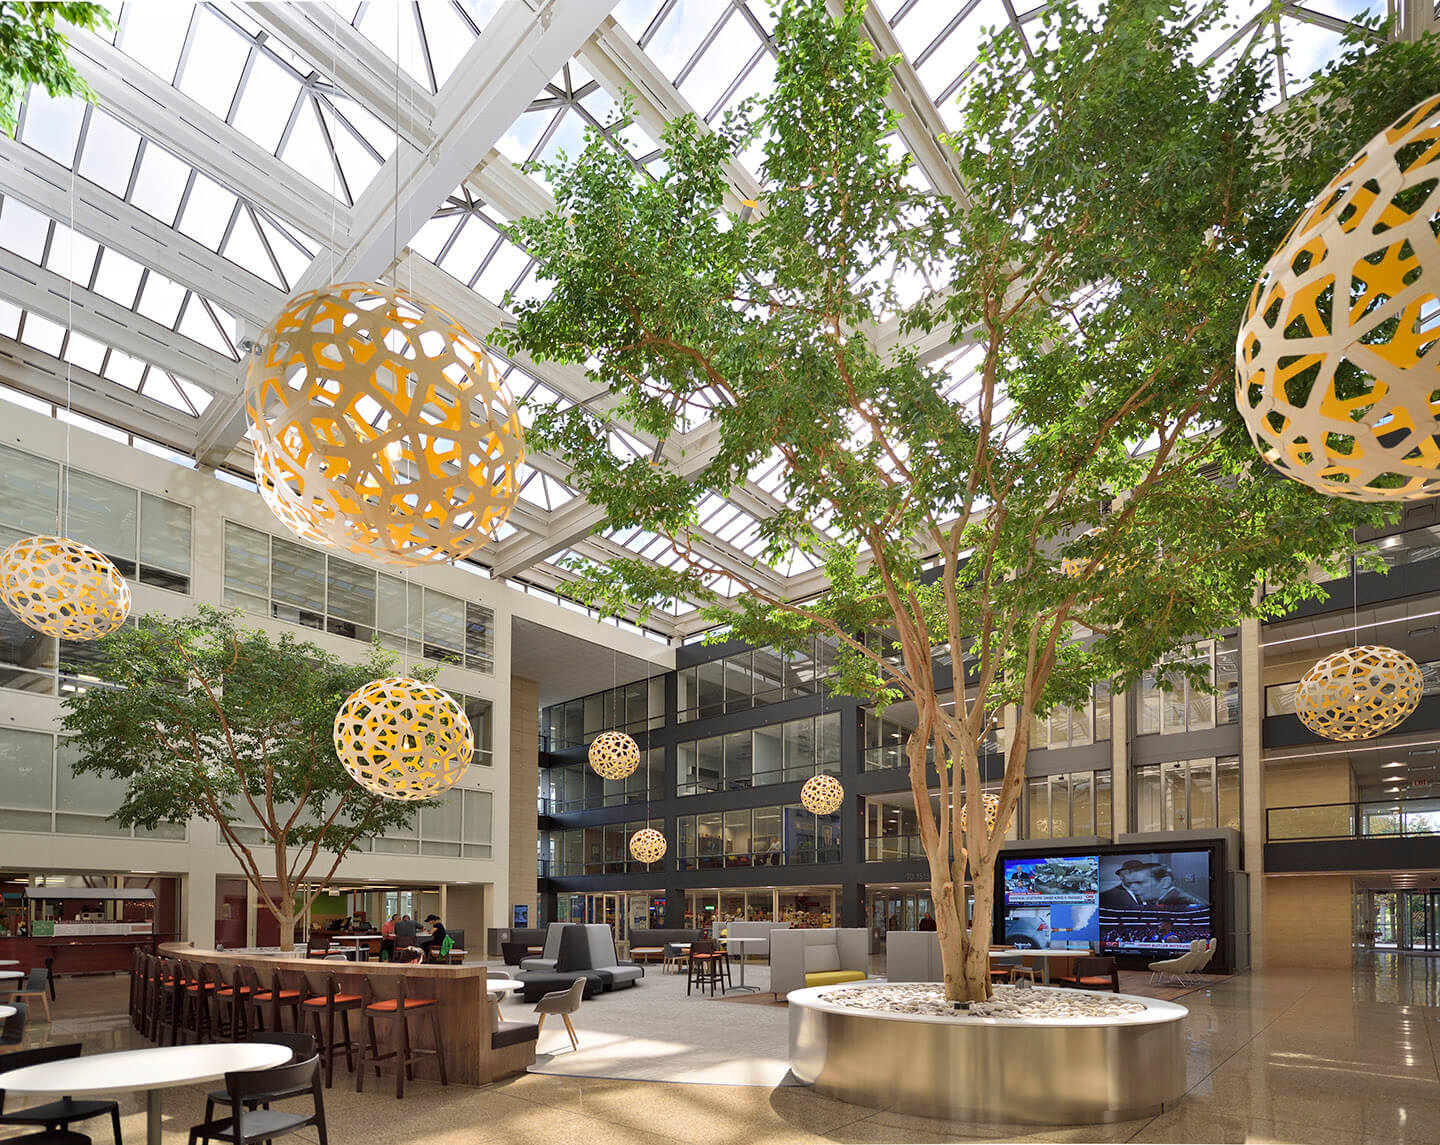 The light filled atrium of the schaumburg corporate center office building with yellow sphere sculptures hanging from ceiling